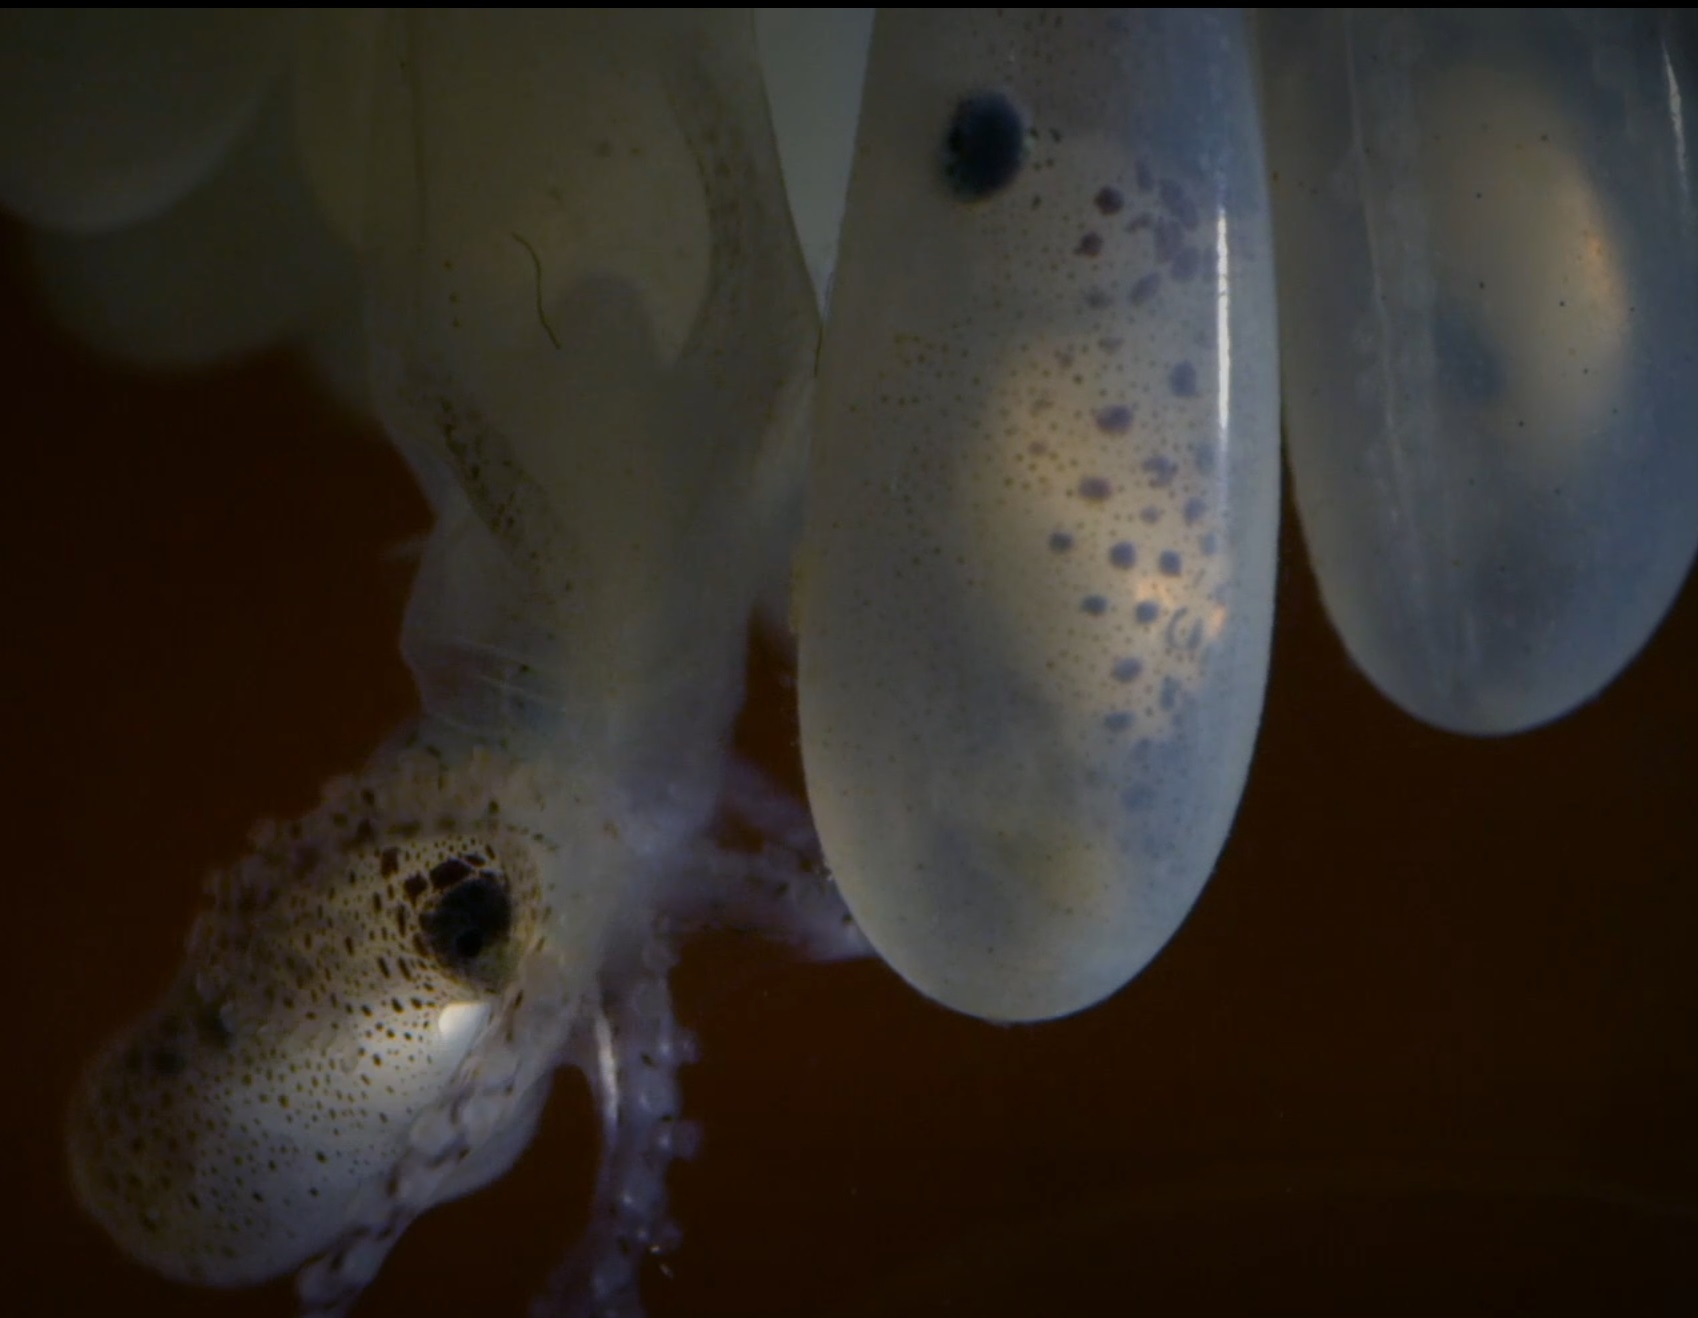 An octopus emerges from an egg in the MBL's Cephalopod Mariculture facility in this screenshot from "Octopus: Making Contact."